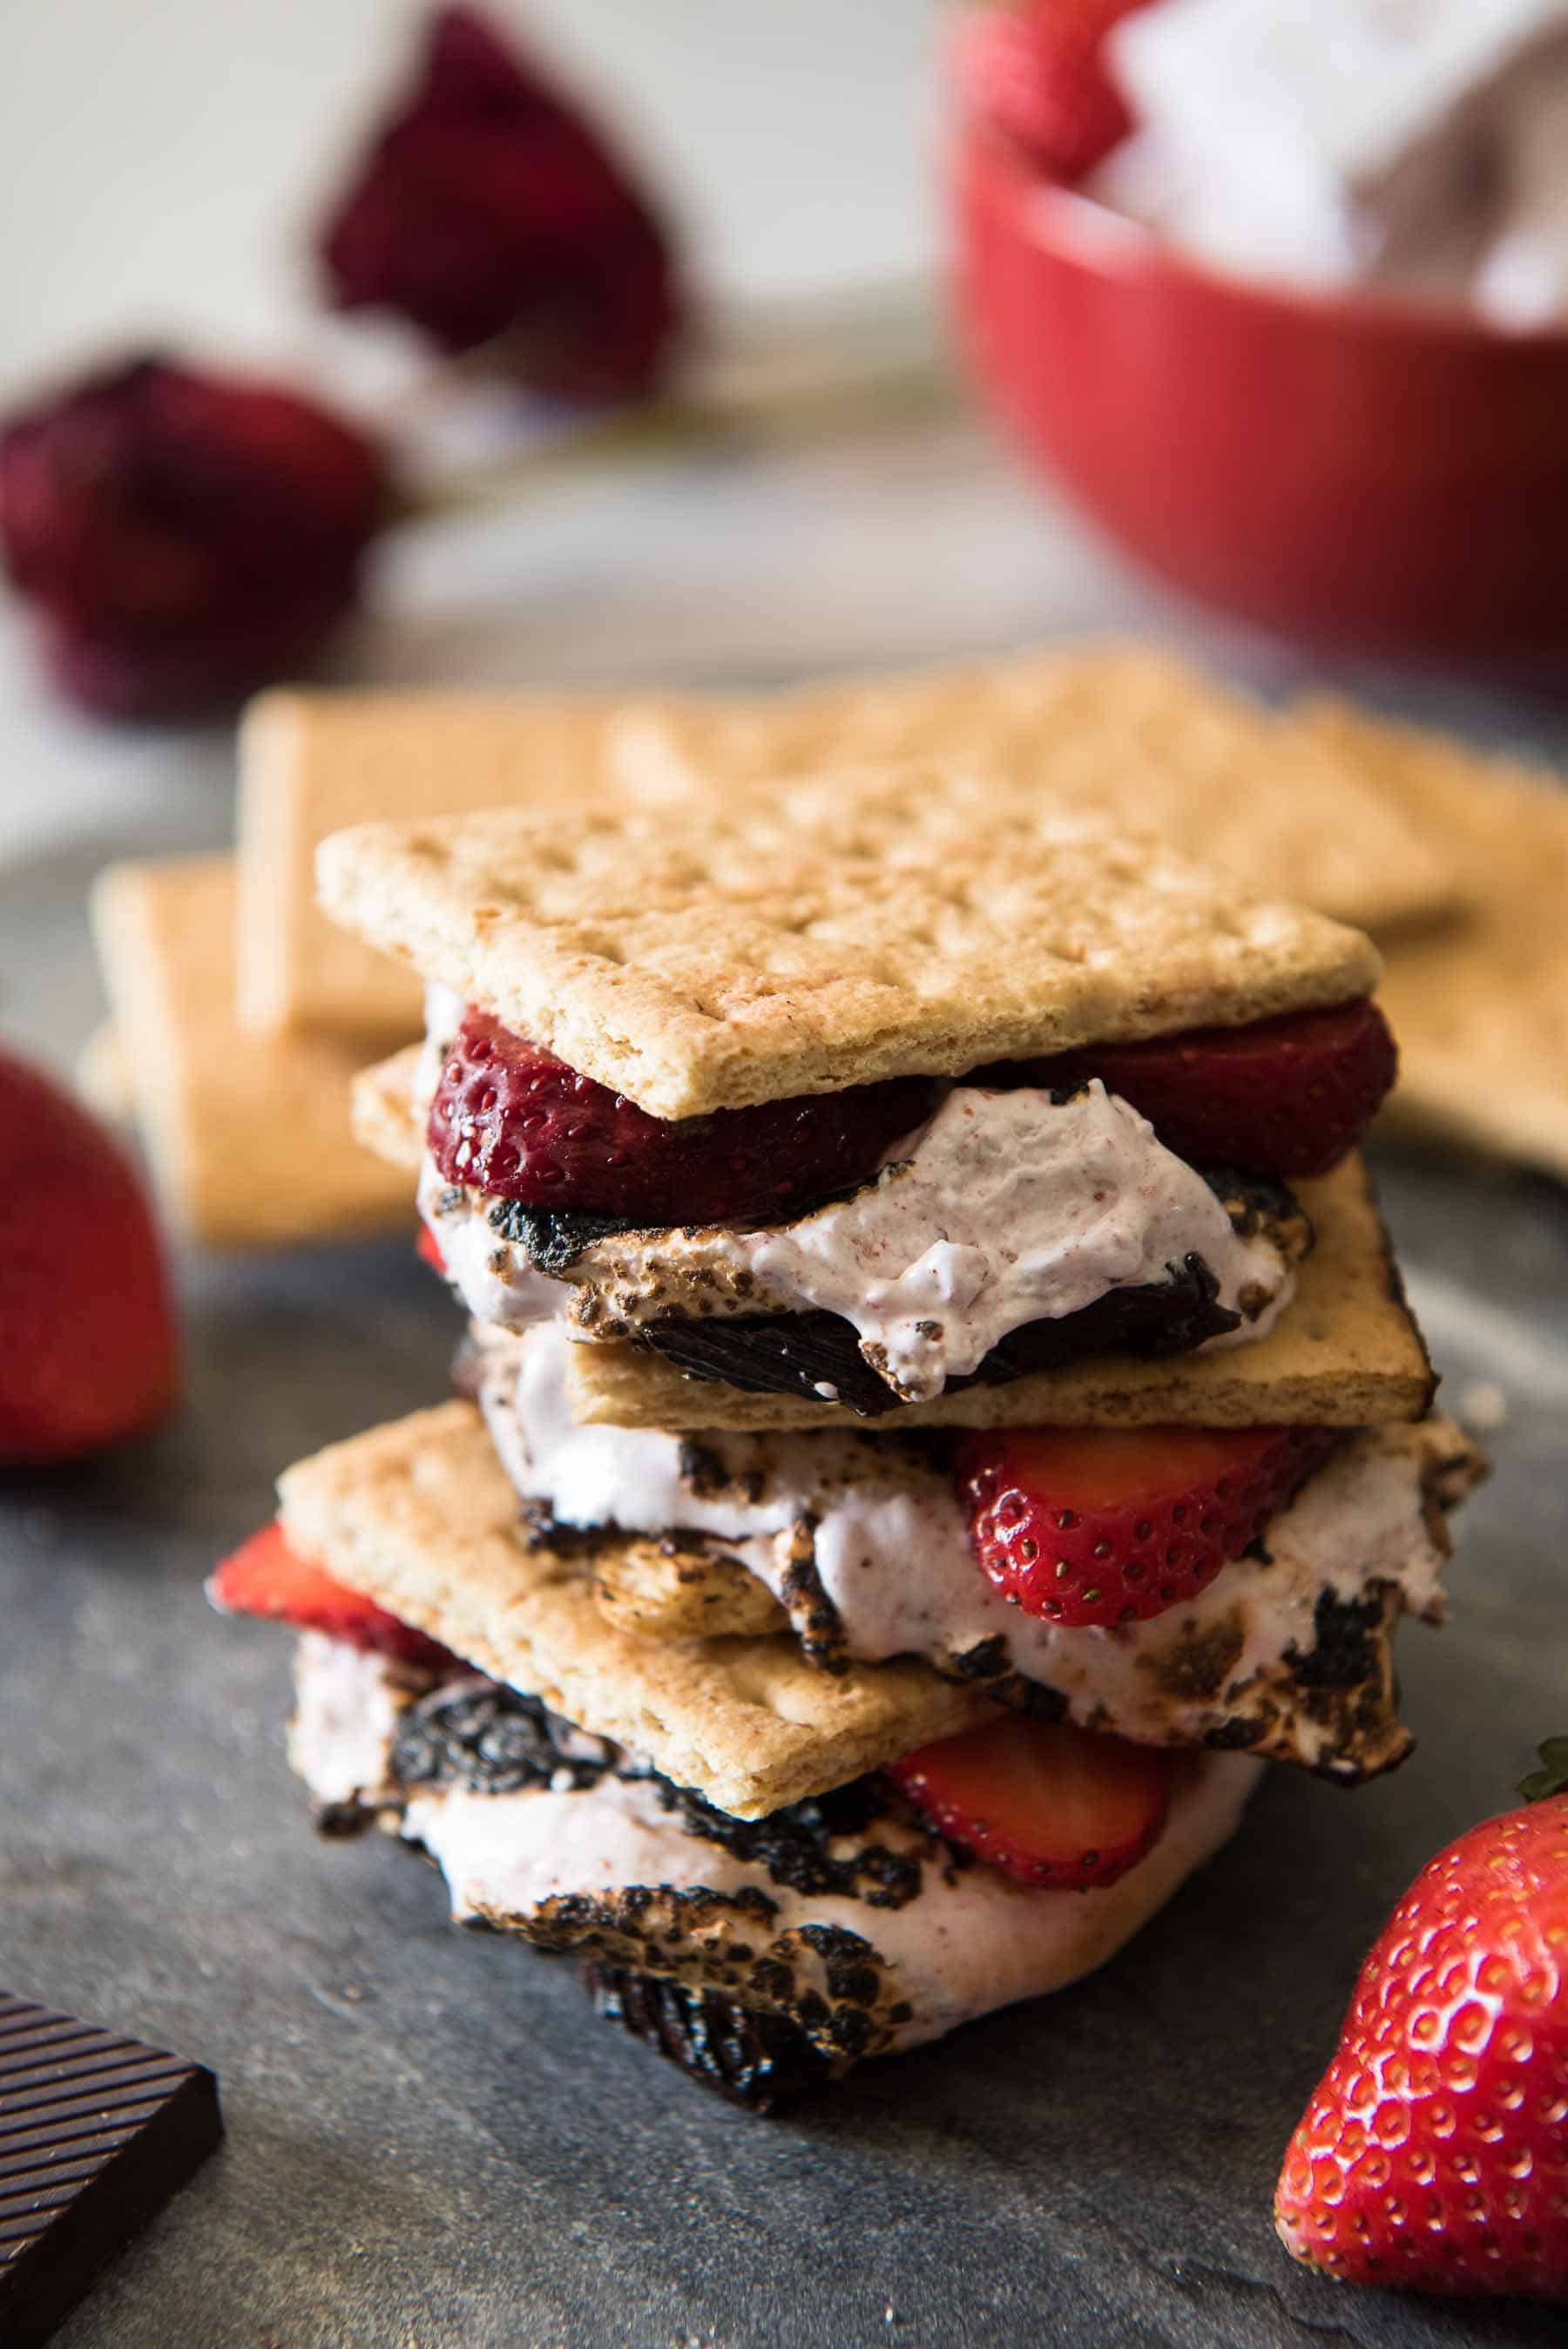 Strawberry S'mores - because winter s'mores are totally a thing! Take these classic treats up a notch by replacing the store-bought standard with homemade strawberry marshmallows, made from dehydrated Florida strawberries!